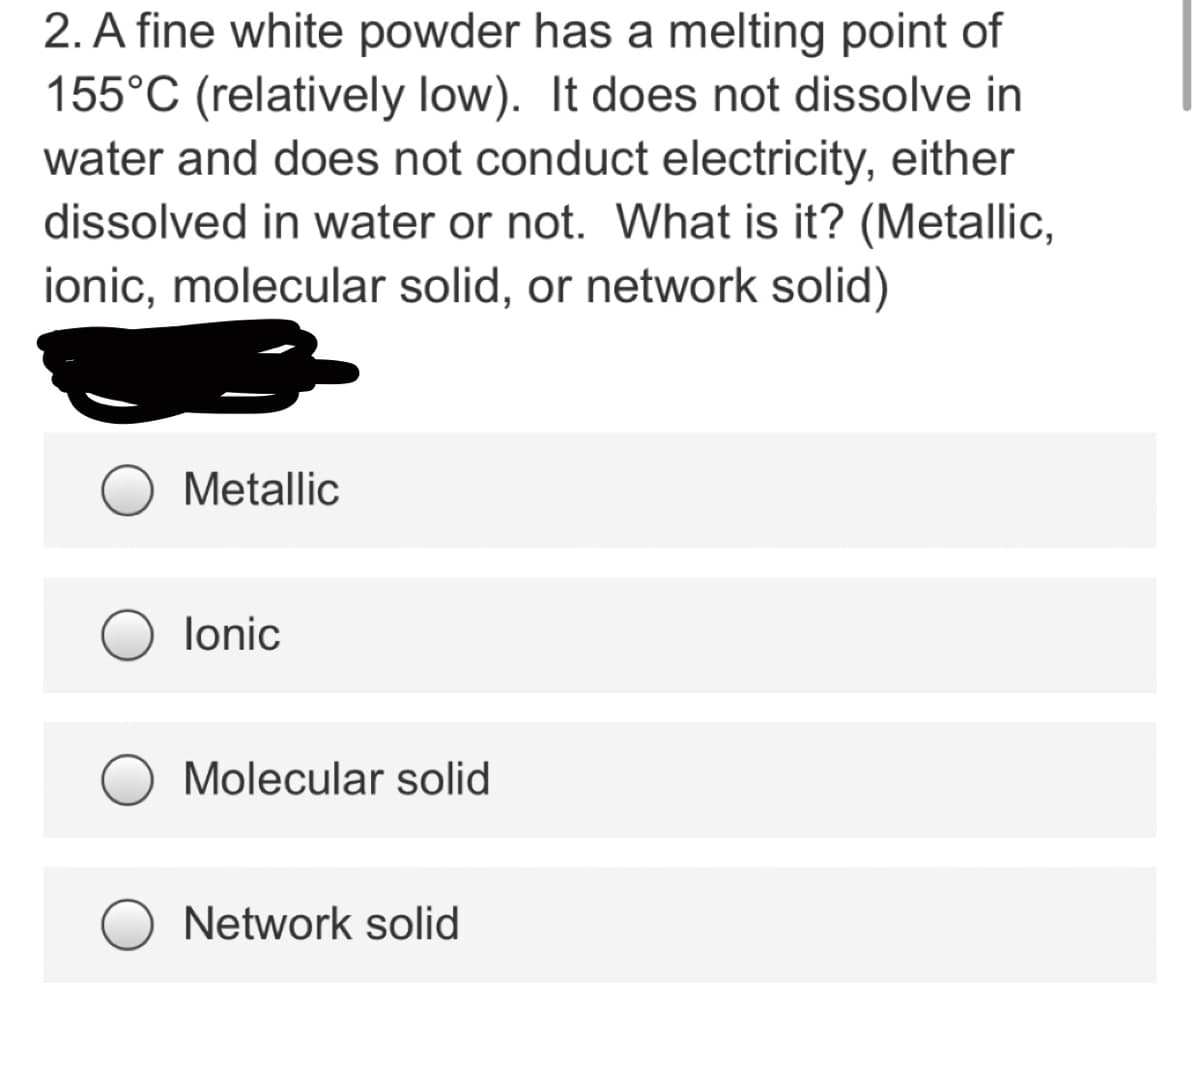 2. A fine white powder has a melting point of
155°C (relatively low). It does not dissolve in
water and does not conduct electricity, either
dissolved in water or not. What is it? (Metallic,
ionic, molecular solid, or network solid)
Metallic
lonic
Molecular solid
Network solid
